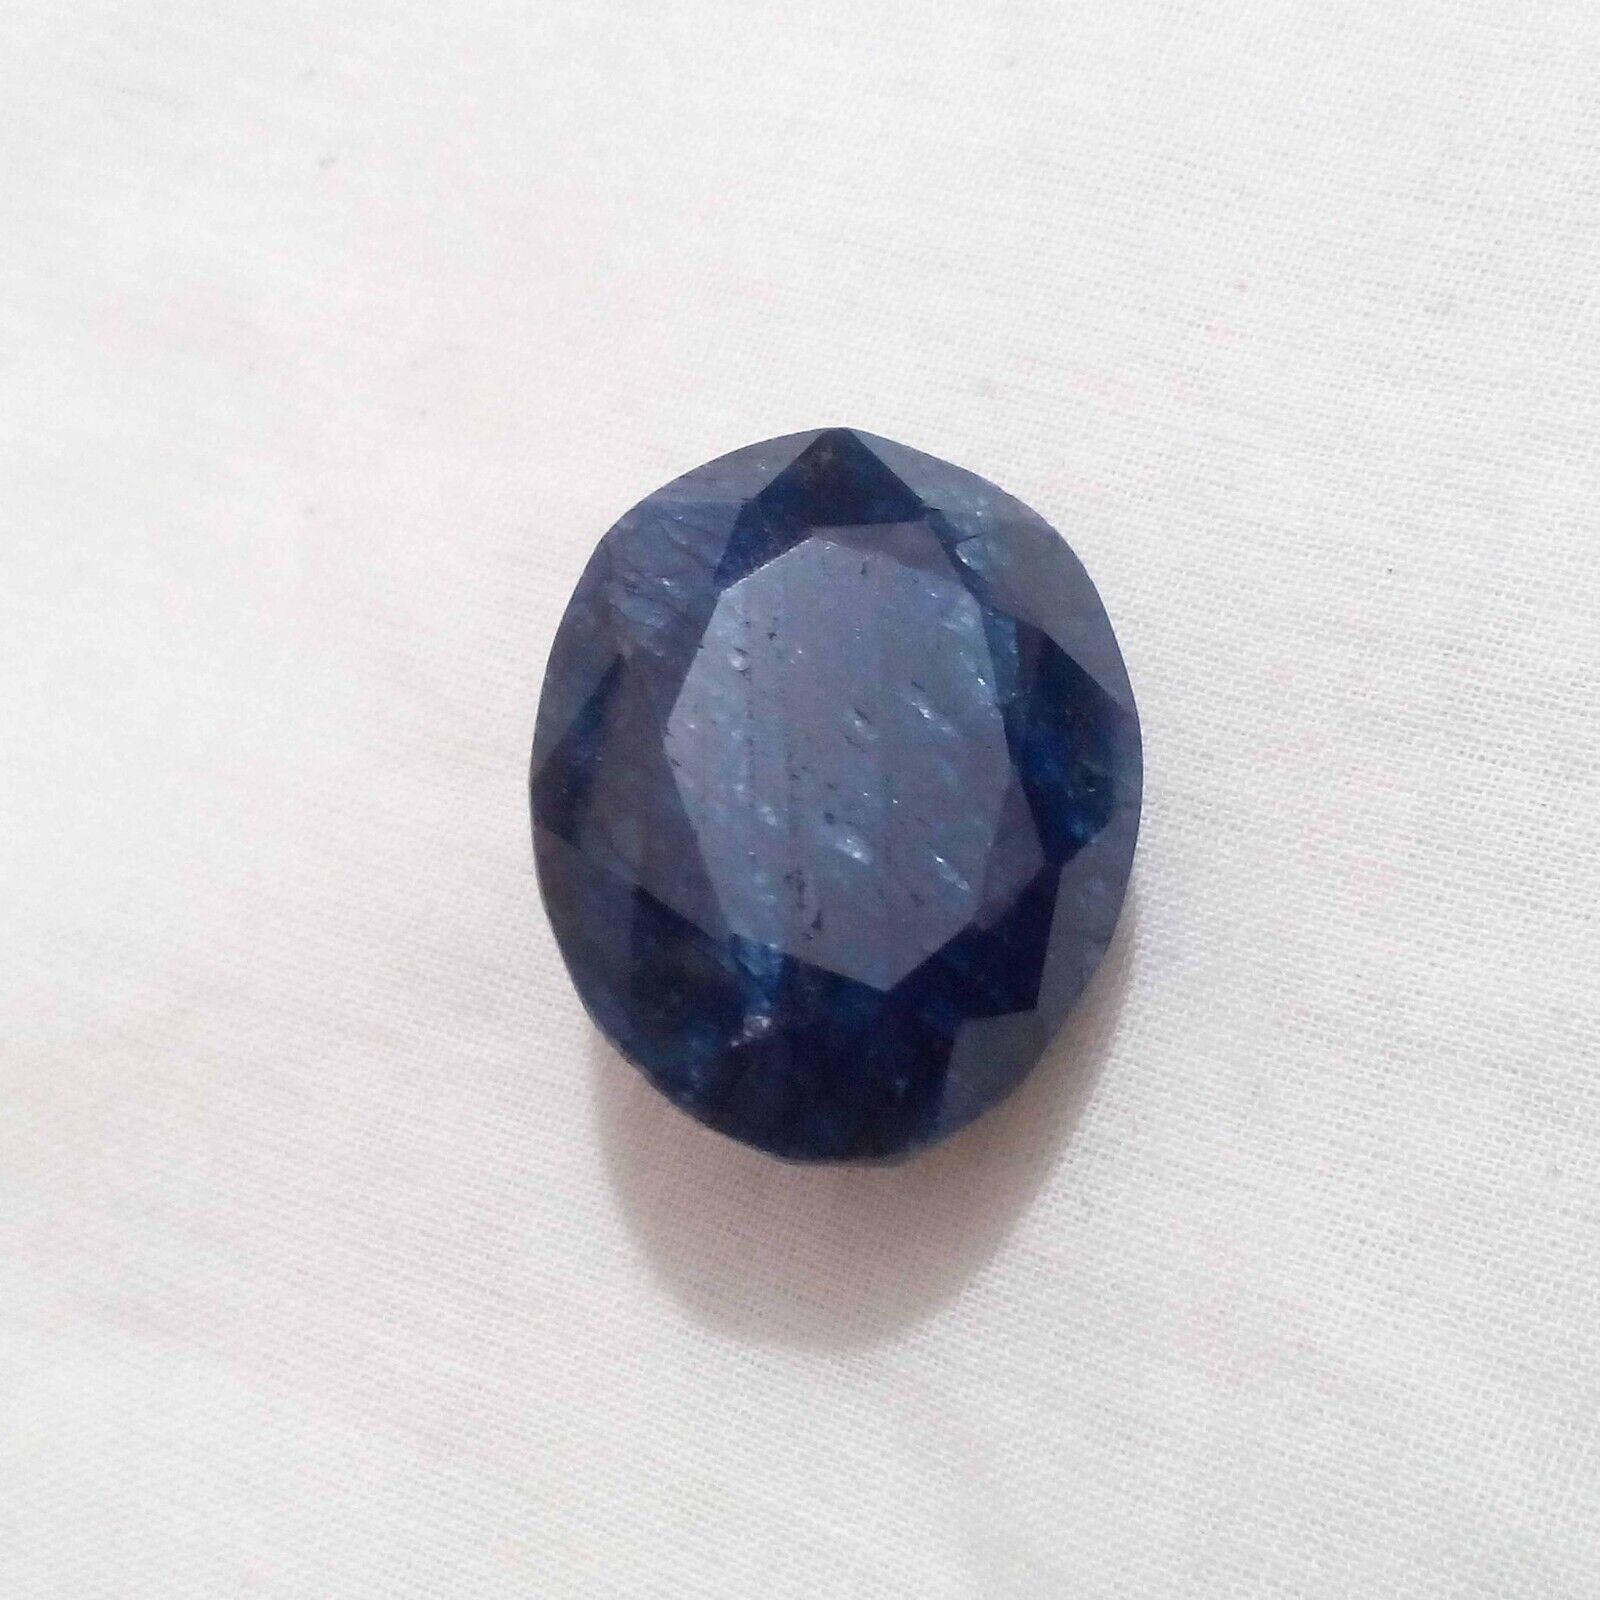 Attractive Madagascar Blue Sapphire Faceted Oval Shape 66.65 Crt Loose Gemstone